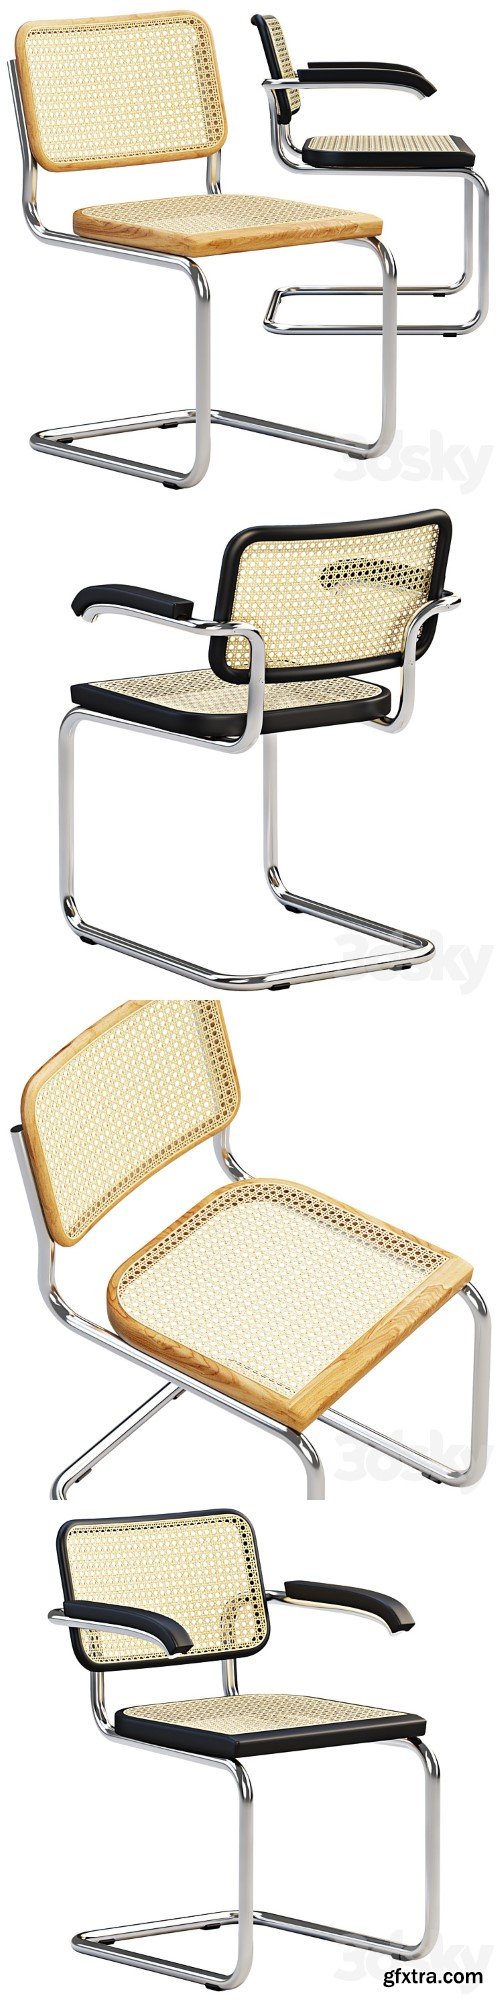 Cesca Chairs B 32 by Marcel Breuer (2 options)